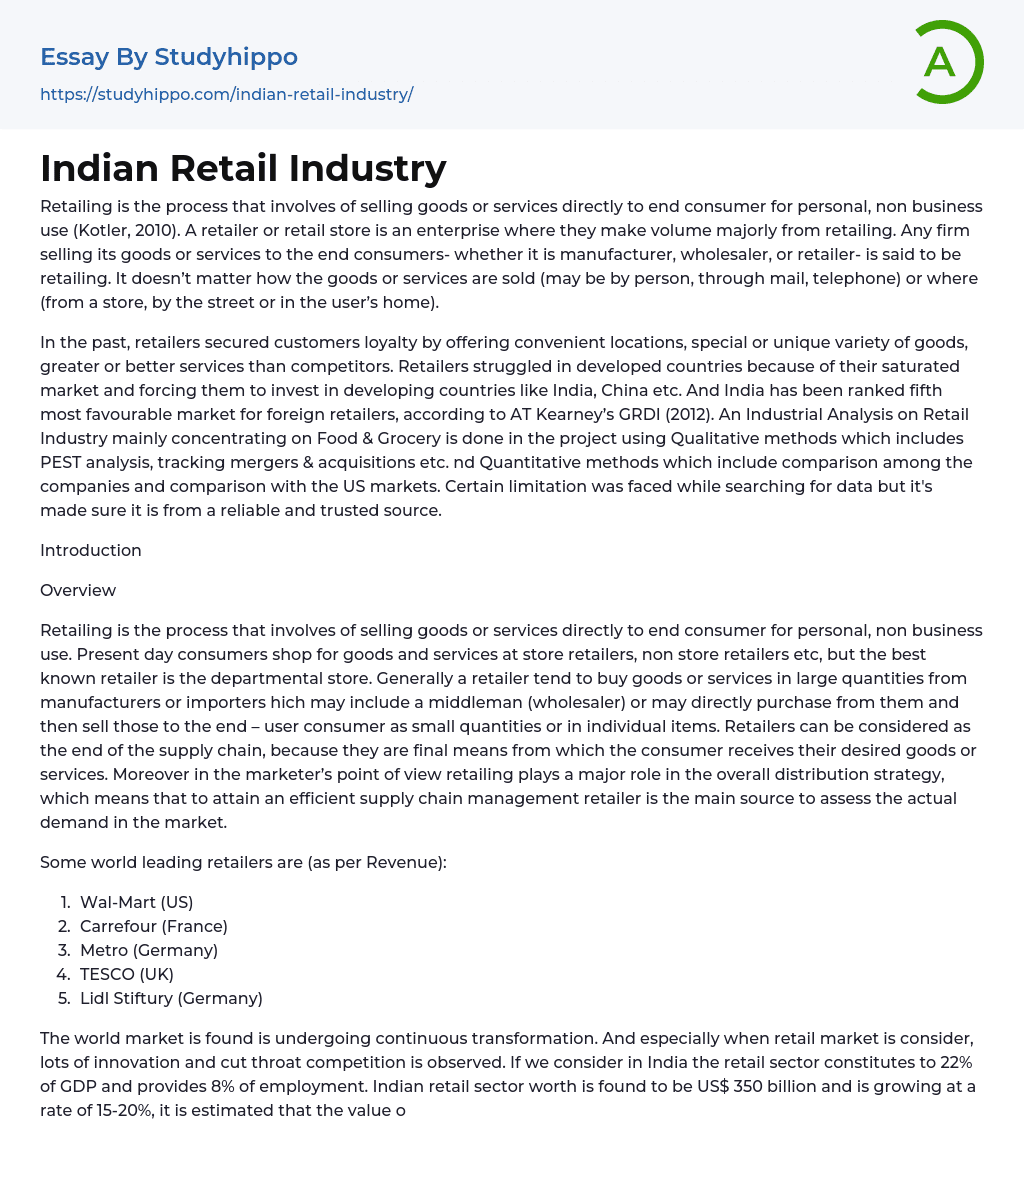 Indian Retail Industry Essay Example